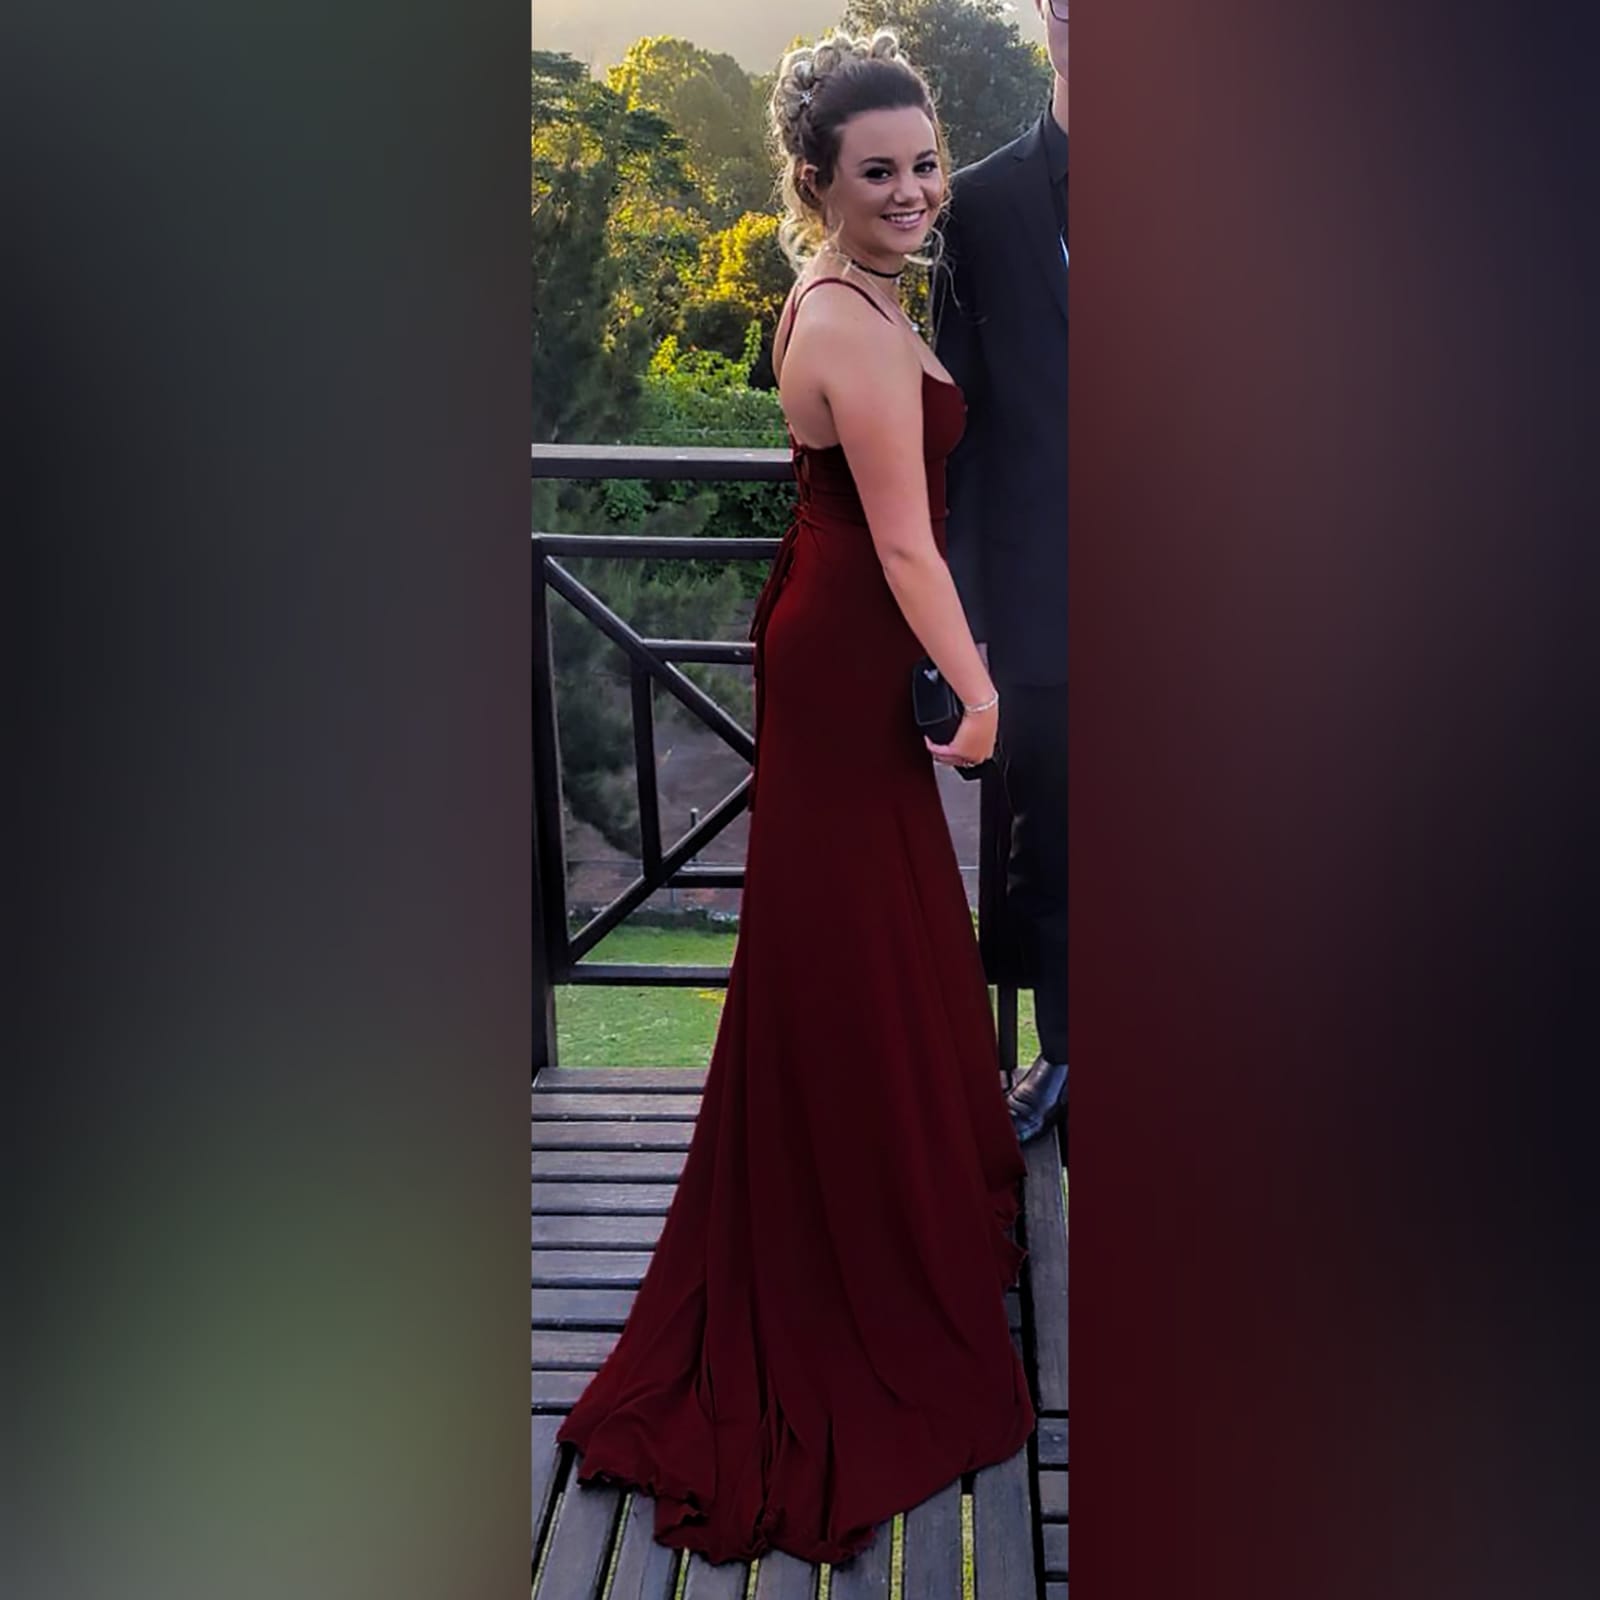 Maroon lace-up back long simple matric dance dress 2 maroon lace-up back long simple matric dance dress with thin shoulder straps, high slit and a small train. Lace-up back to adjust the fit.